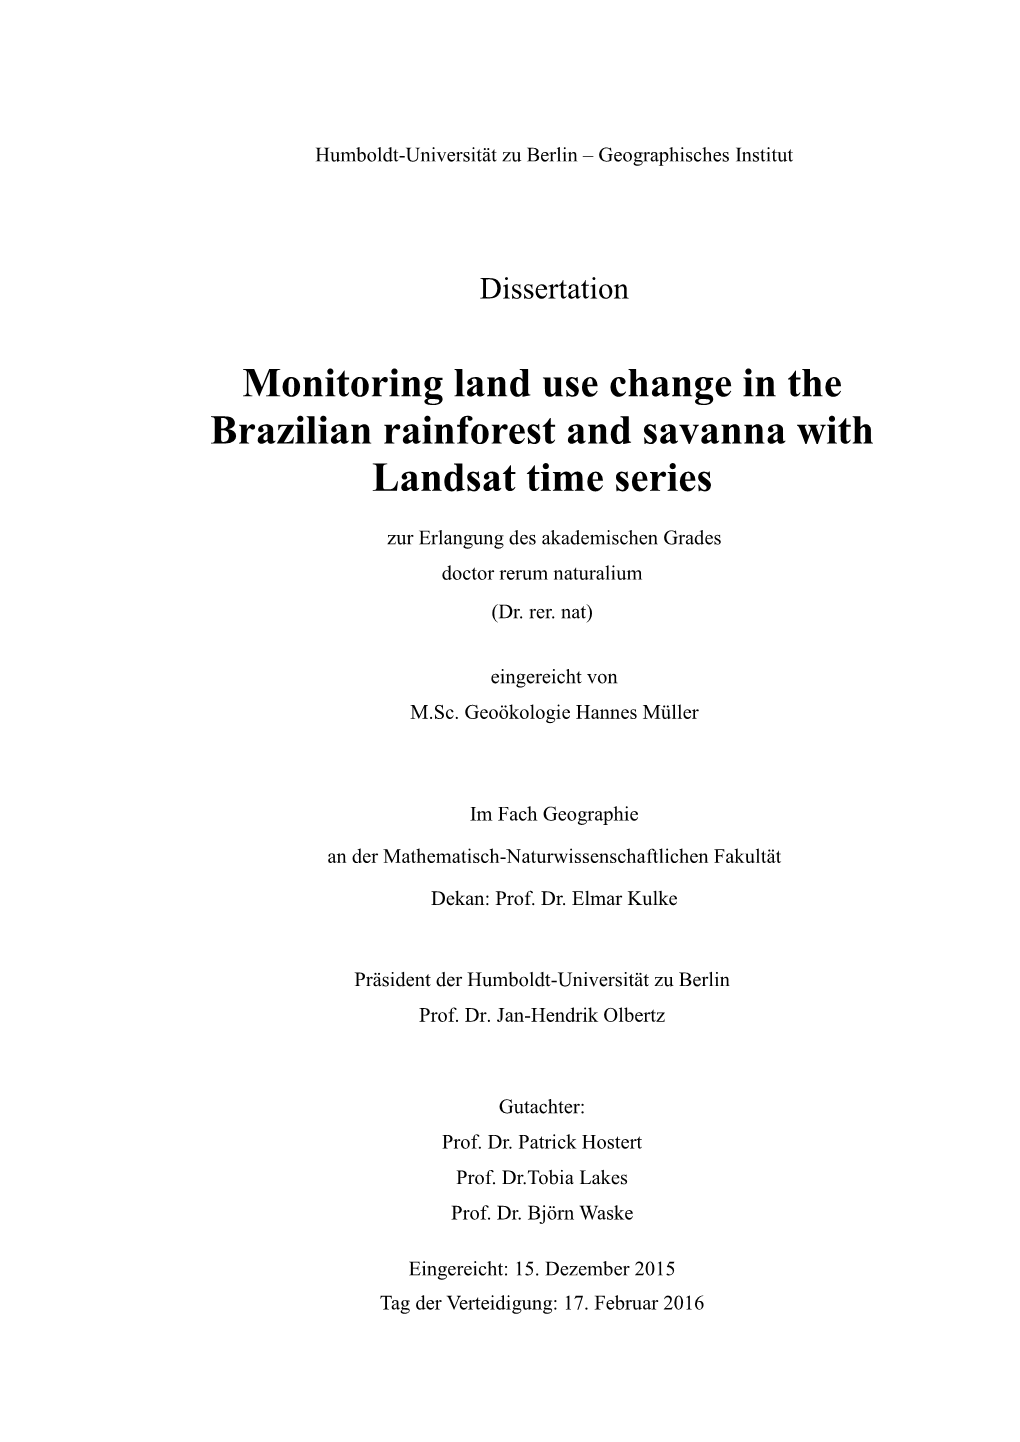 Monitoring Land Use Change in the Brazilian Rainforest and Savanna with Landsat Time Series